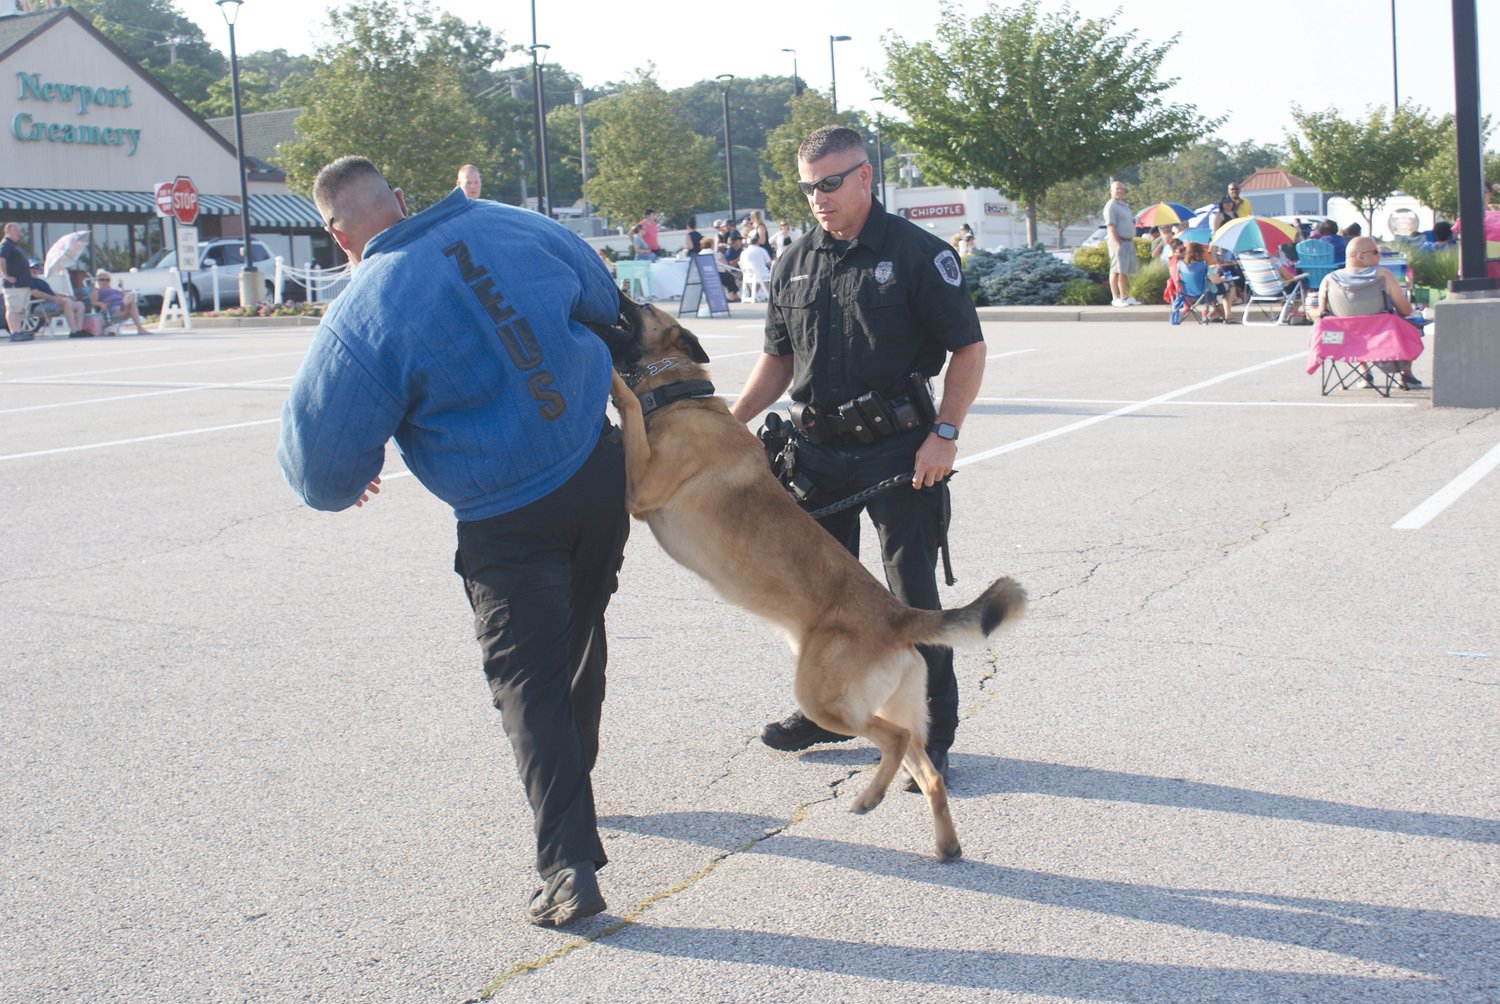 TAKE A BITE OUT OF CRIME : Pictured are K-9 Officer from the Department of Corrections CO Vermette watching his K-9 Paz “attack” K-9 Officer Nathan Bagshaw from the Cranston Police Department in a “bite jacket”.